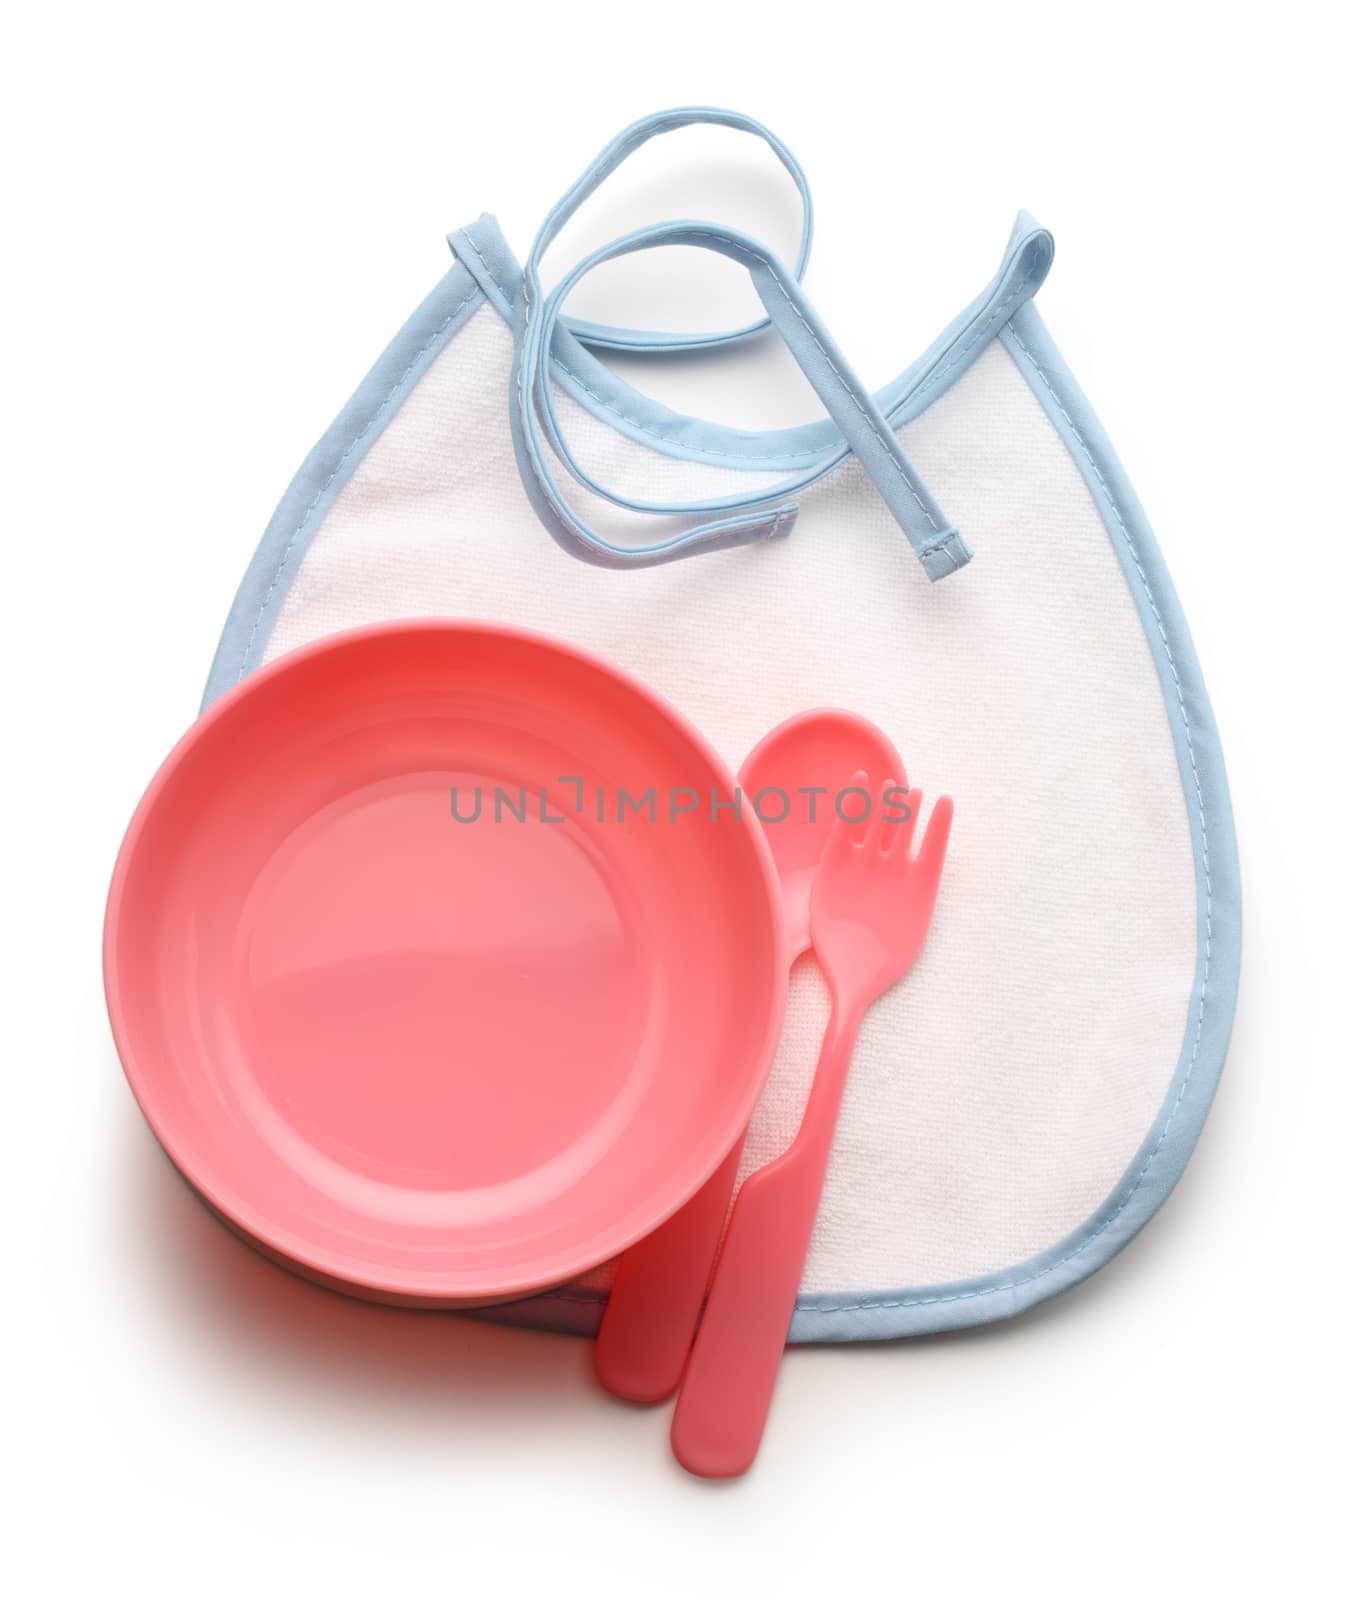 Bibs, bowl and spoon for baby